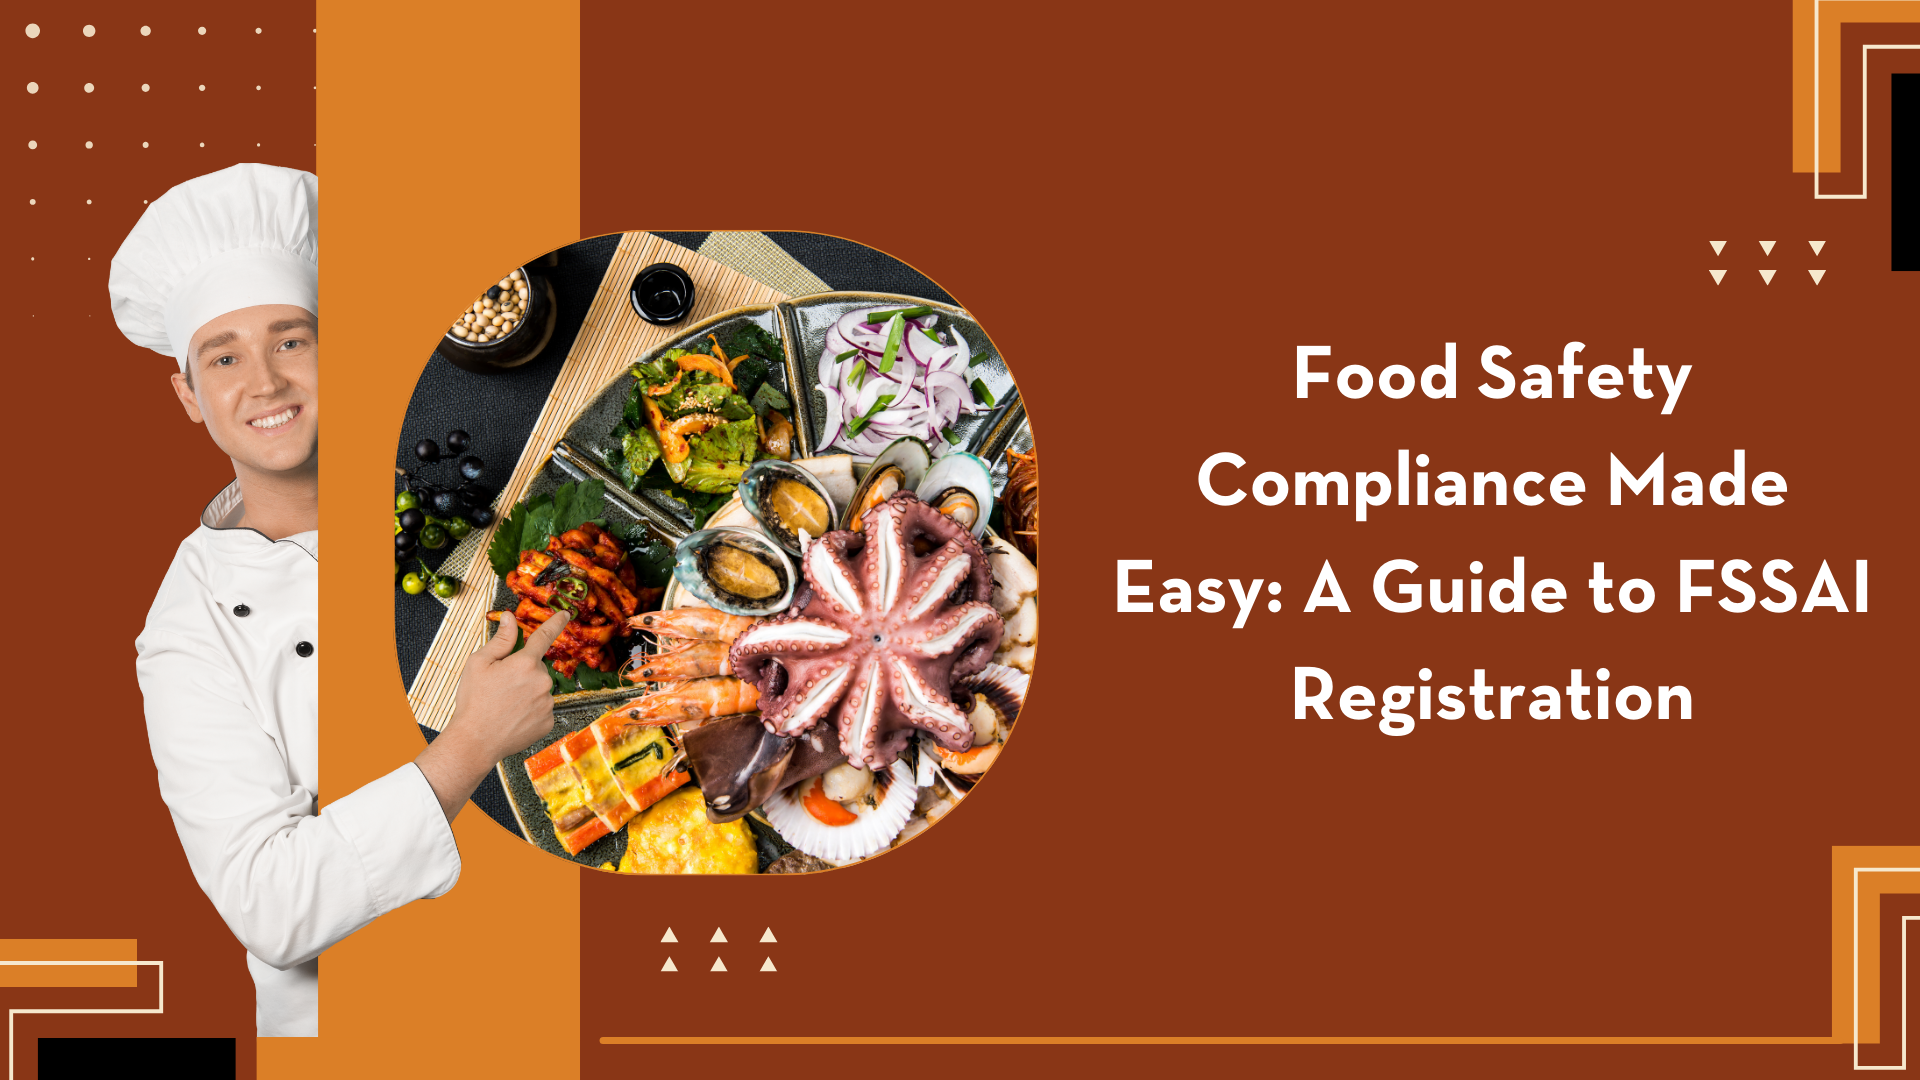 Food Safety Compliance Made Easy: A Guide to FSSAI Registration